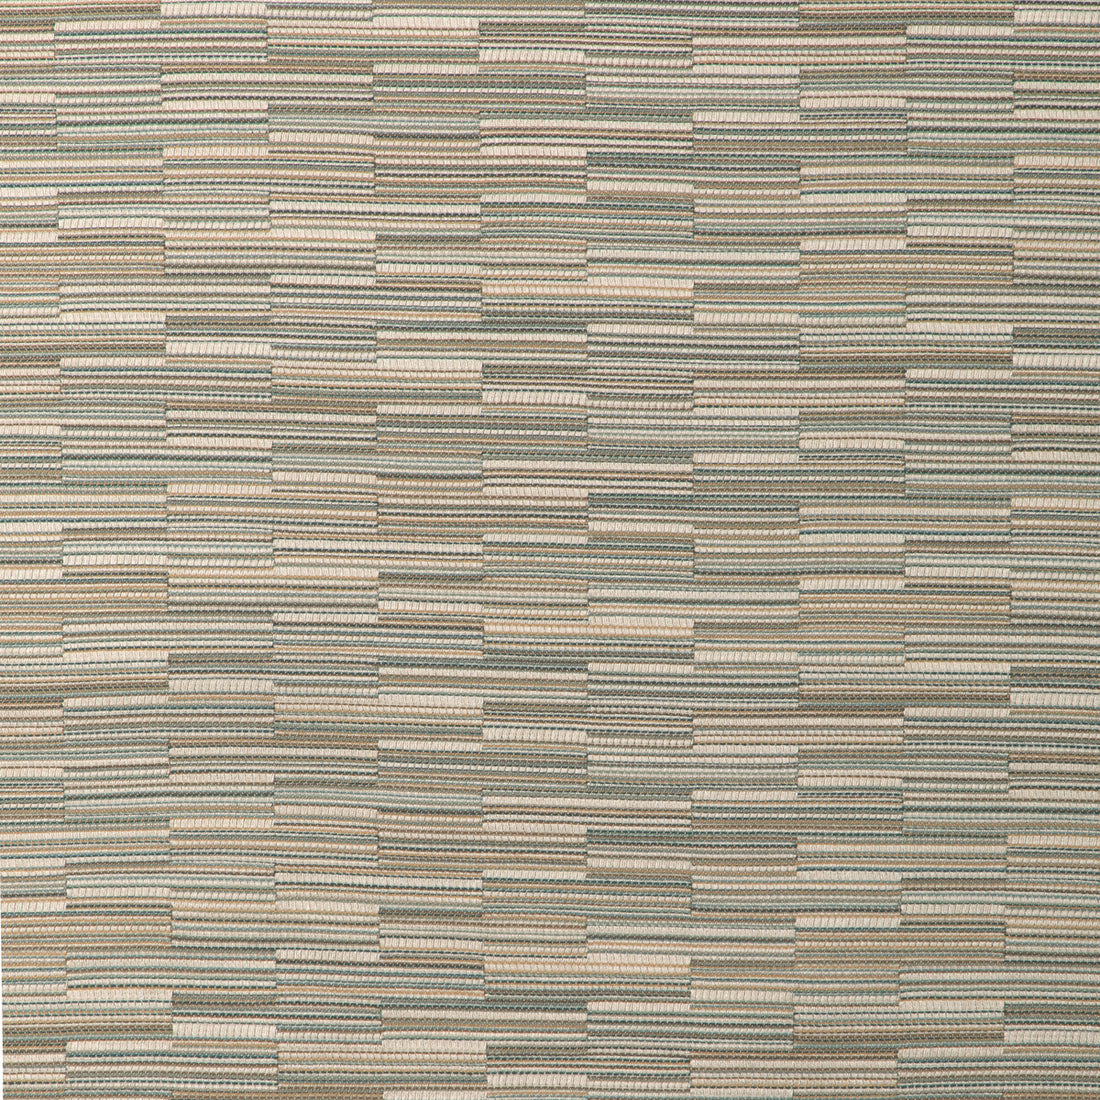 Kravet Design fabric in 37179-516 color - pattern 37179.516.0 - by Kravet Design in the Woven Colors collection